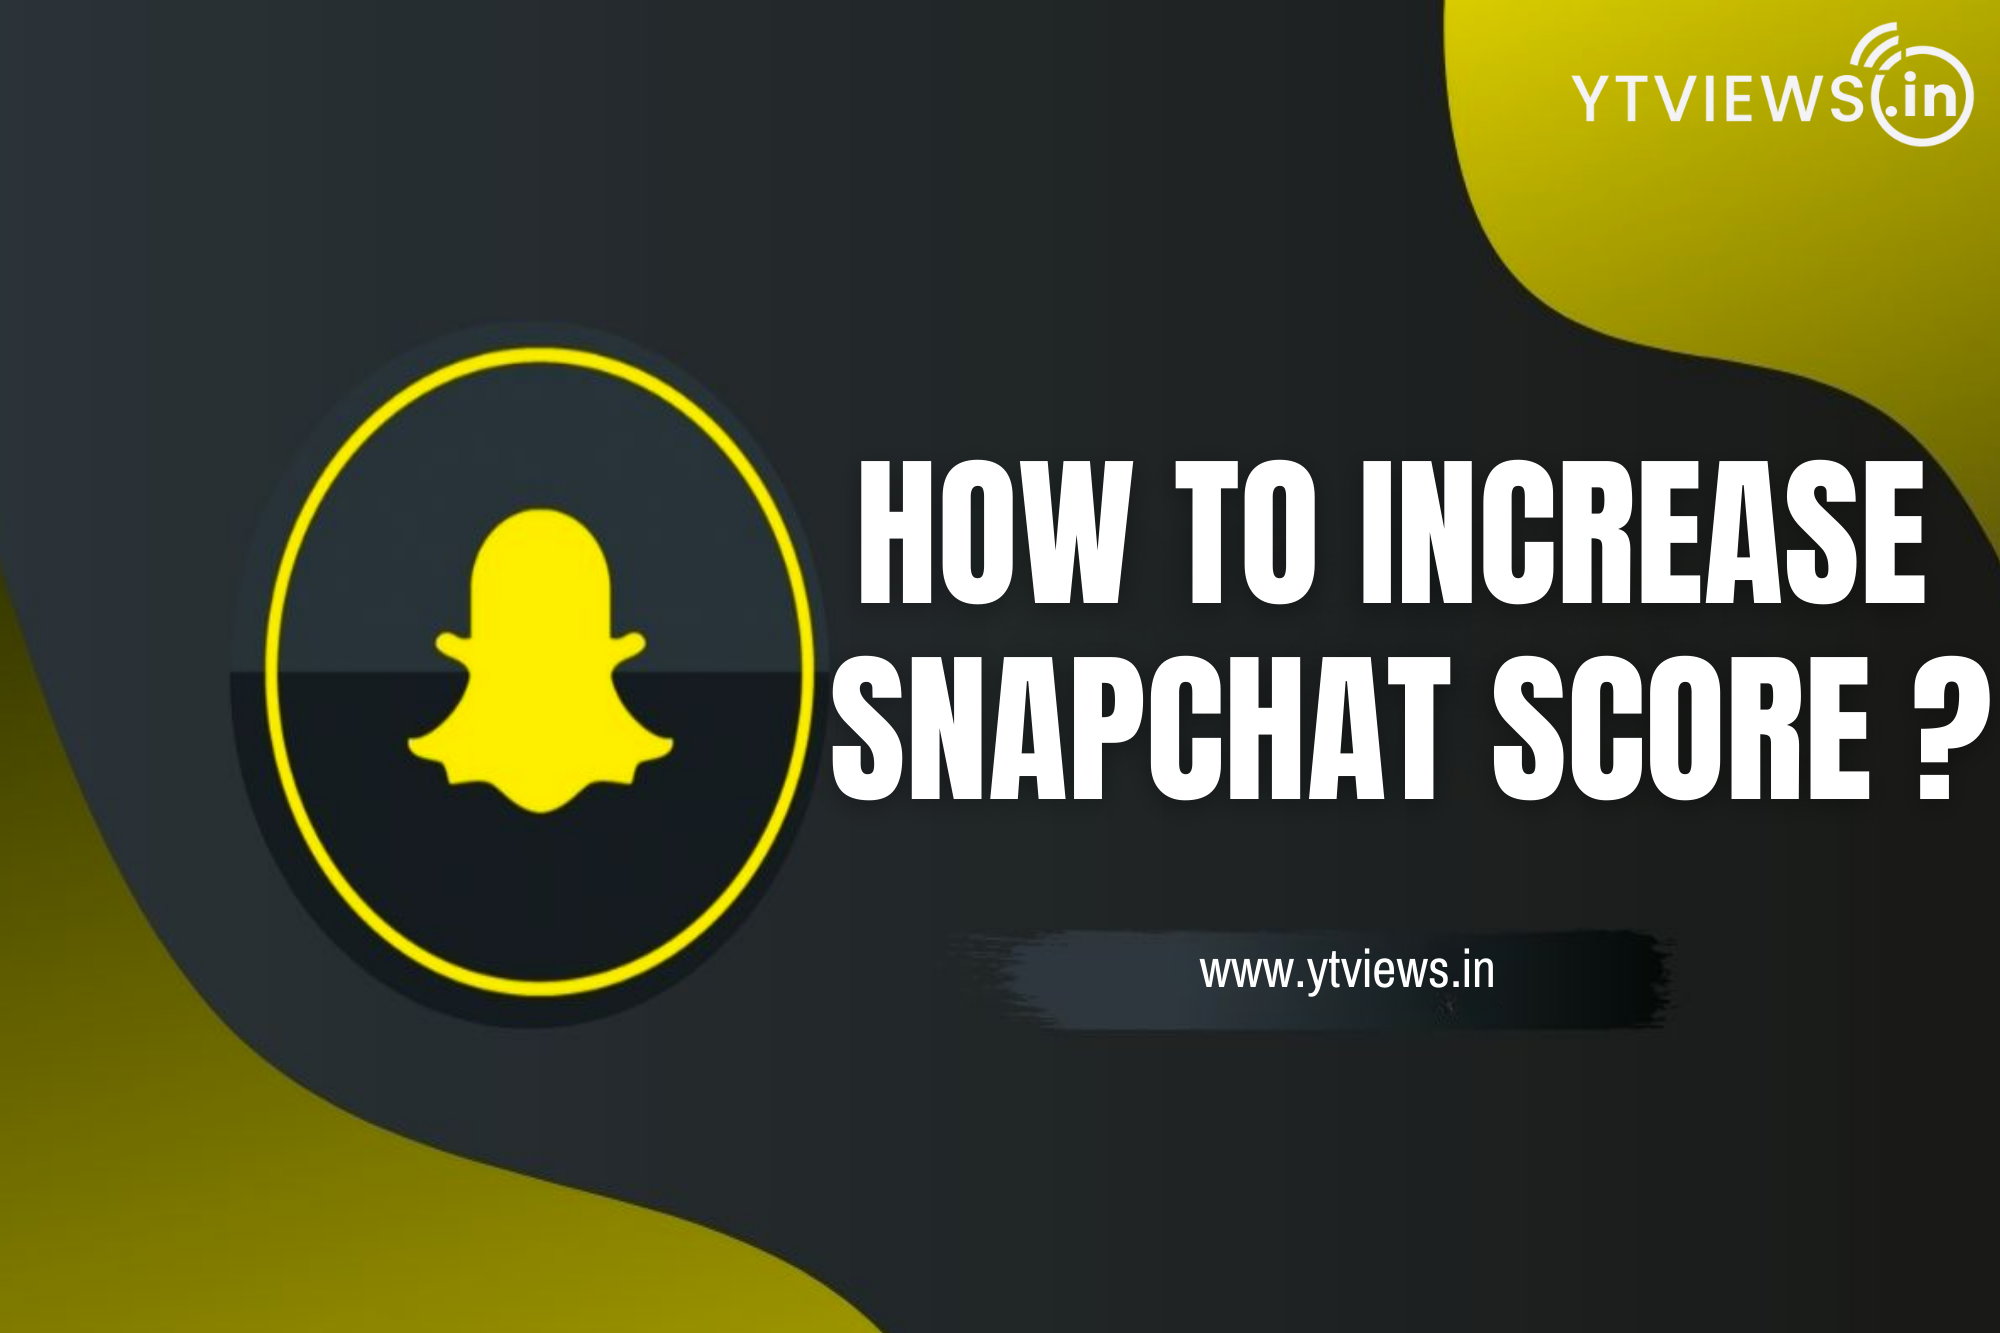 How to increase Snapchat score?